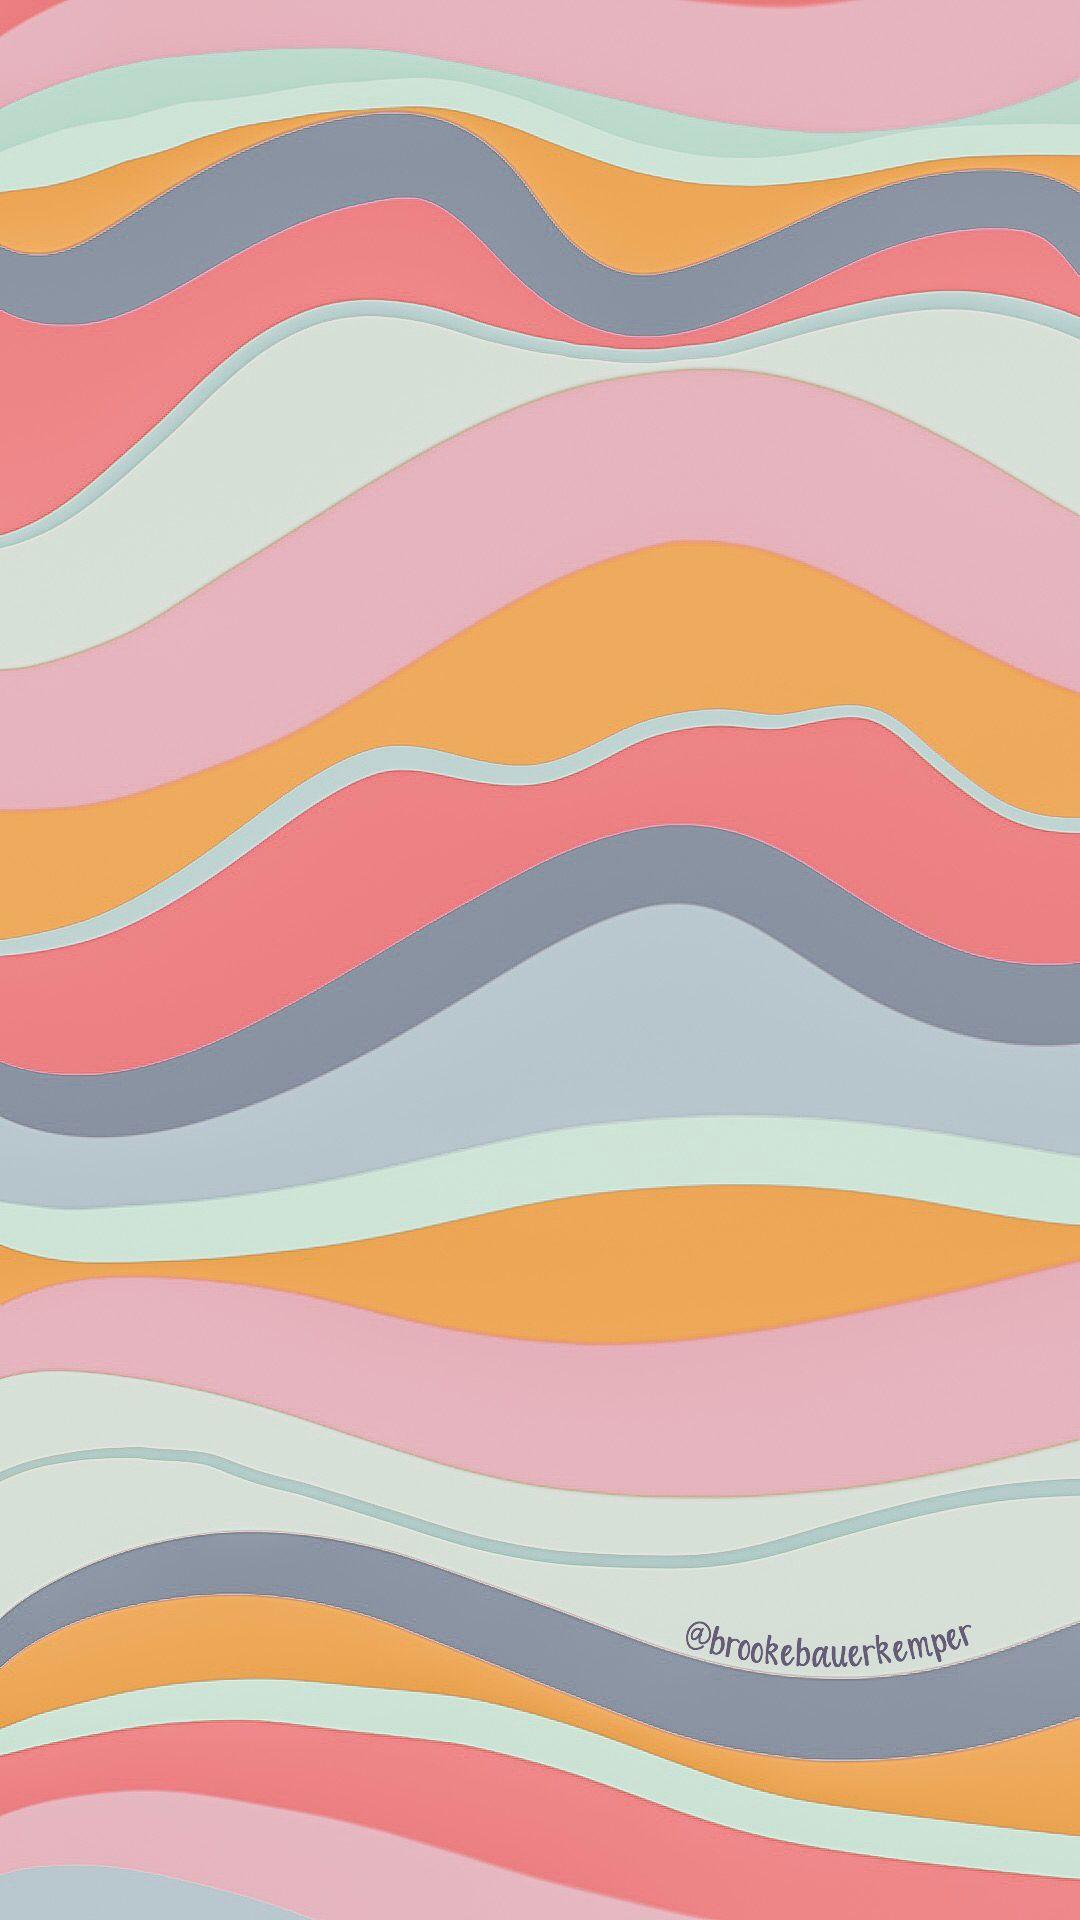 A colorful abstract pattern of wavy lines in pastel colors - VSCO